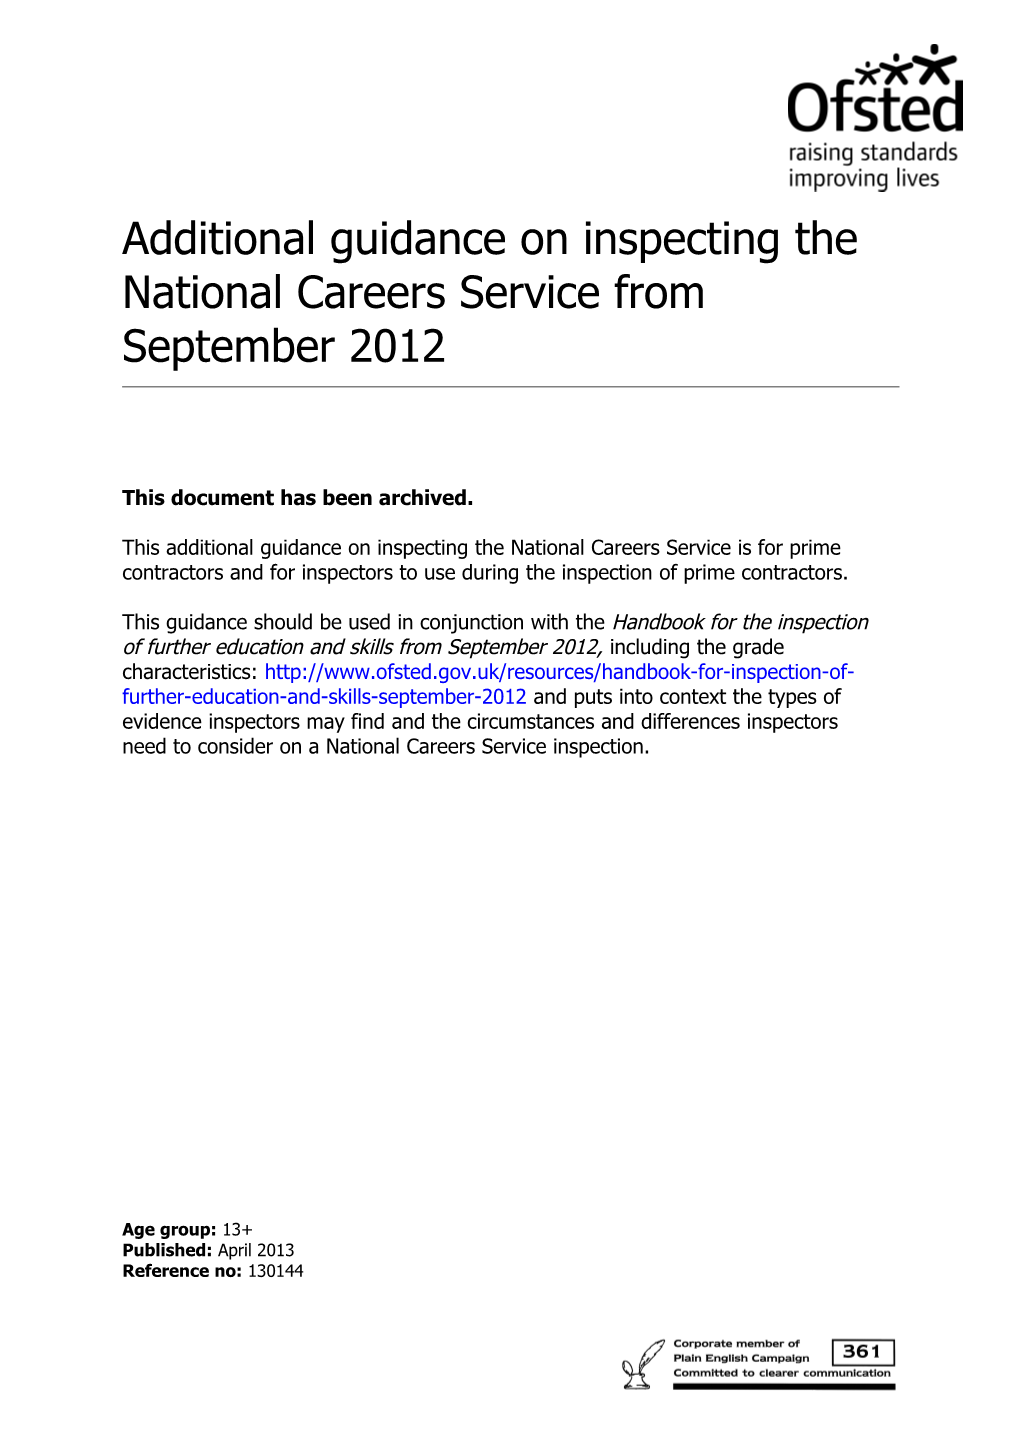 Additional Guidance on Inspecting the National Careers Service from September 2012